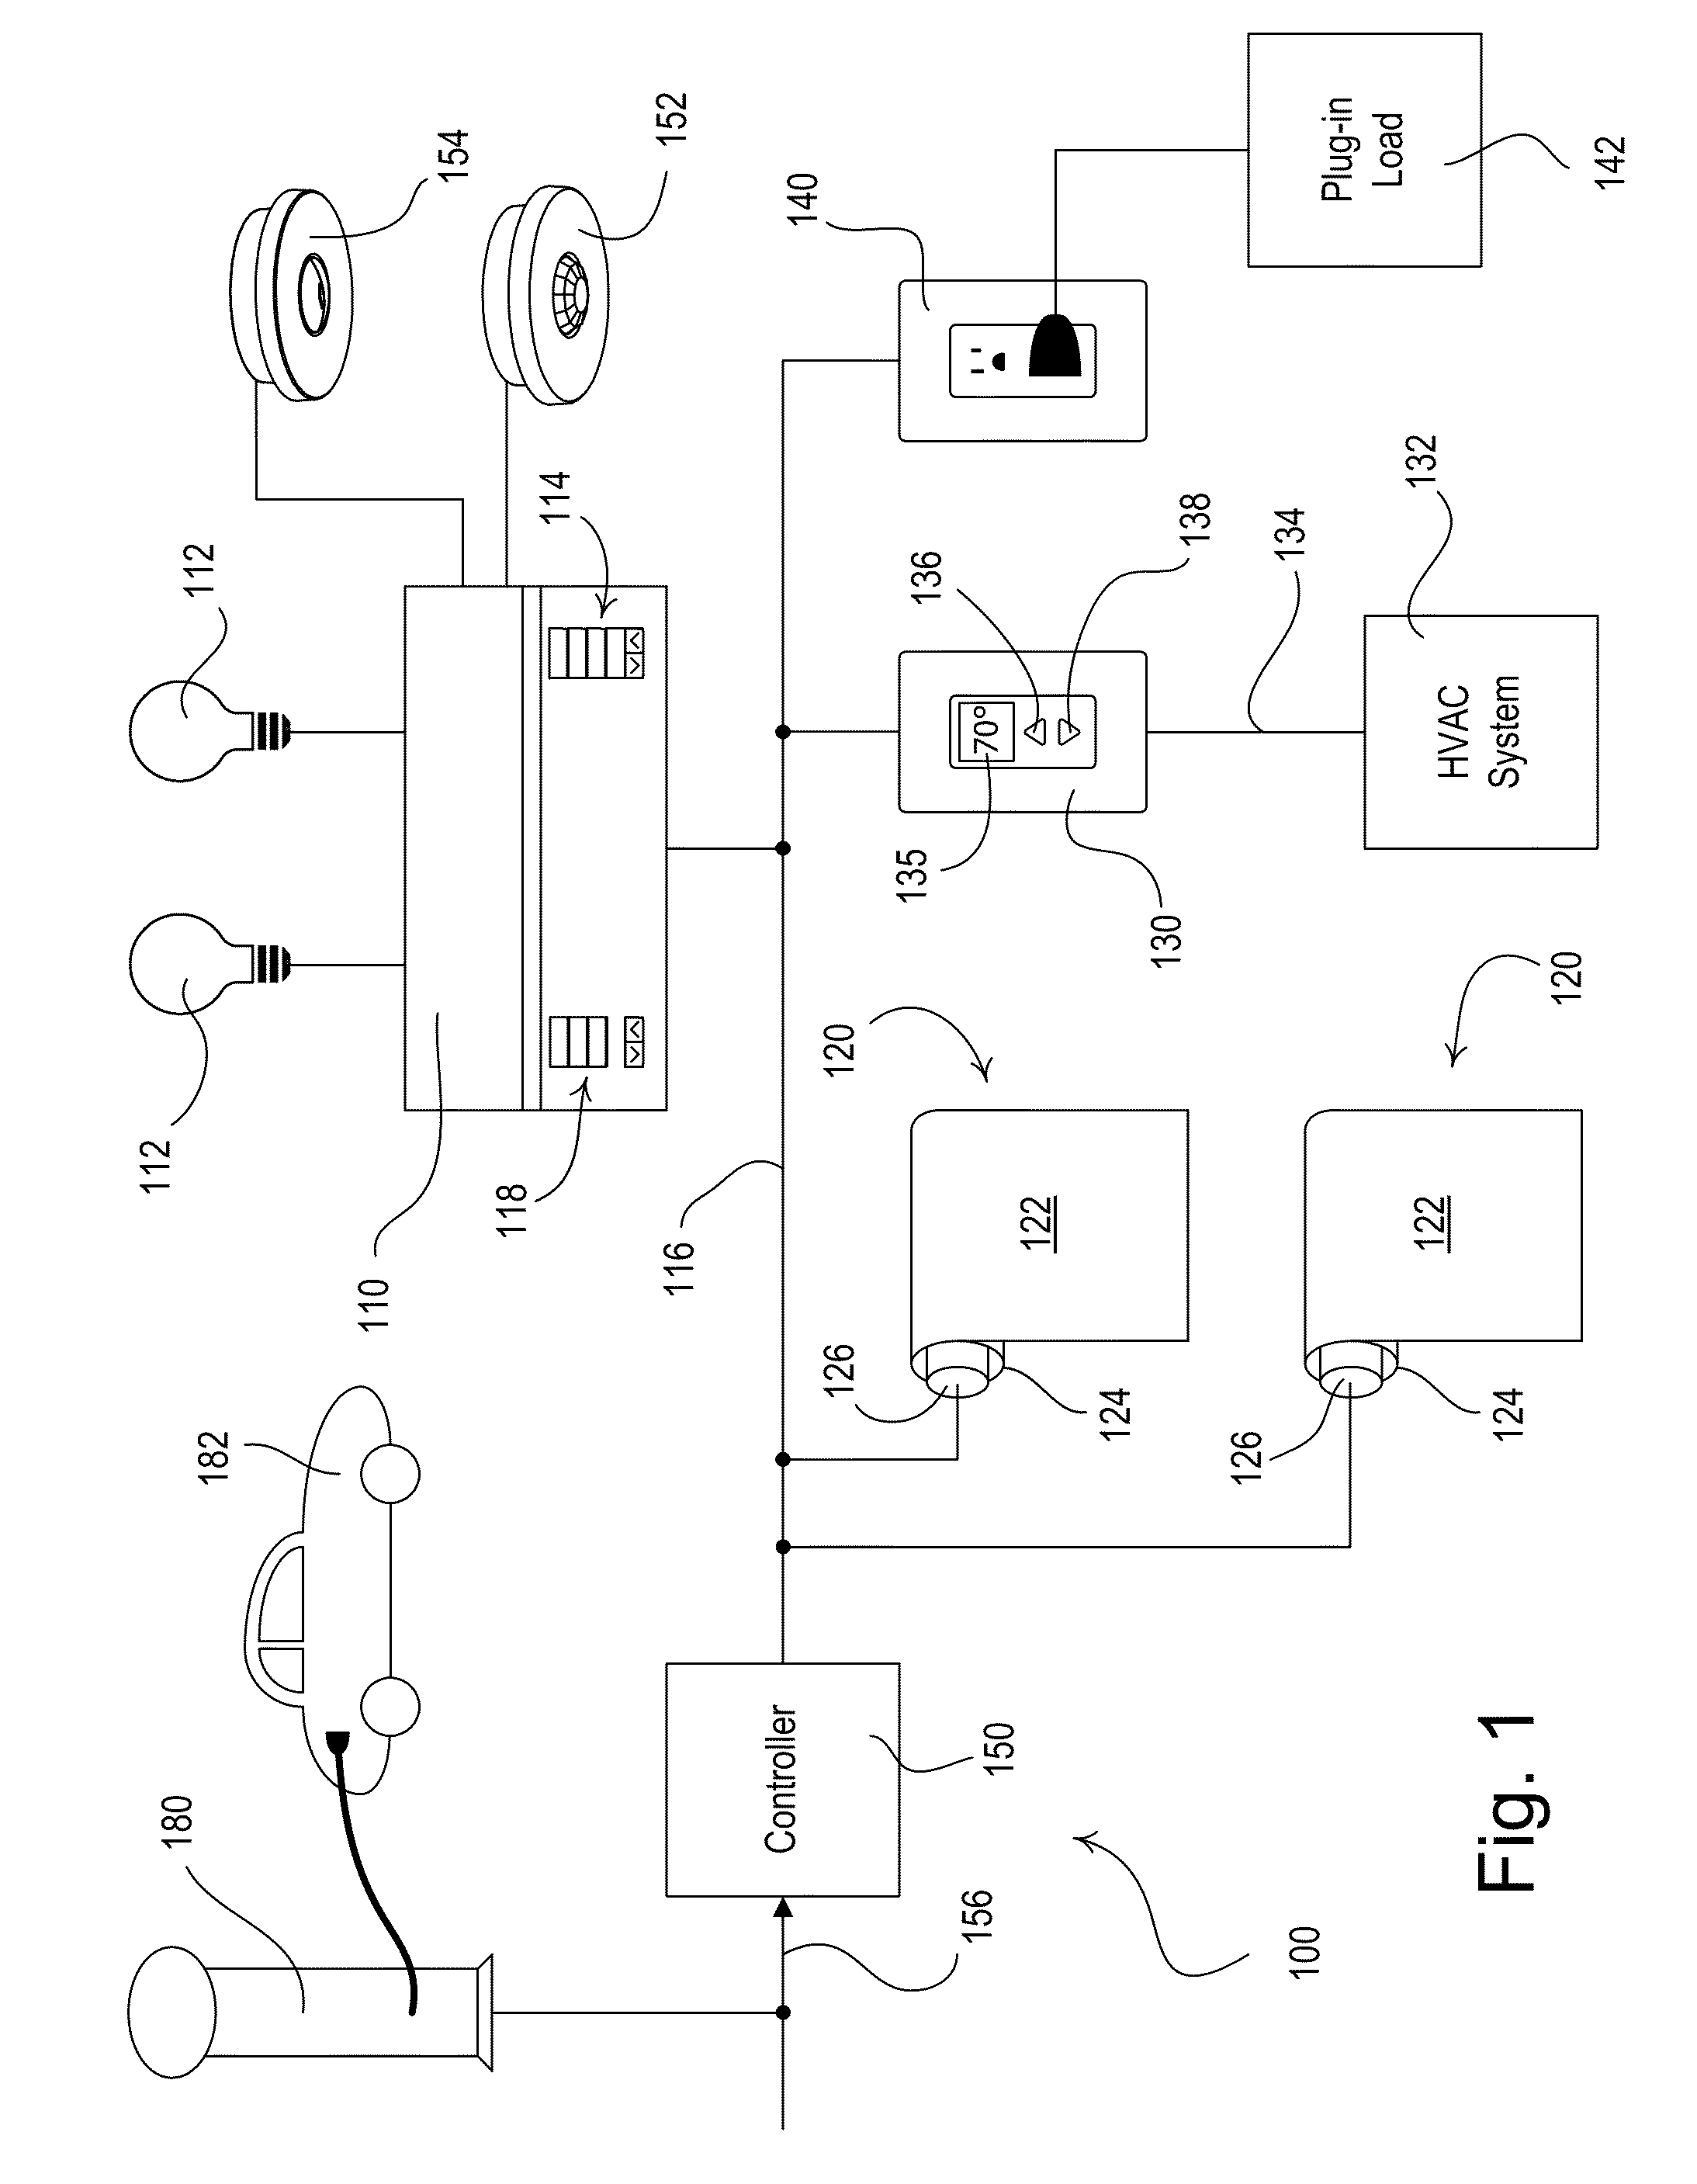 Load Control System That Operates in an Energy-Savings Mode When an Electric Vehicle Charger is Charging a Vehicle